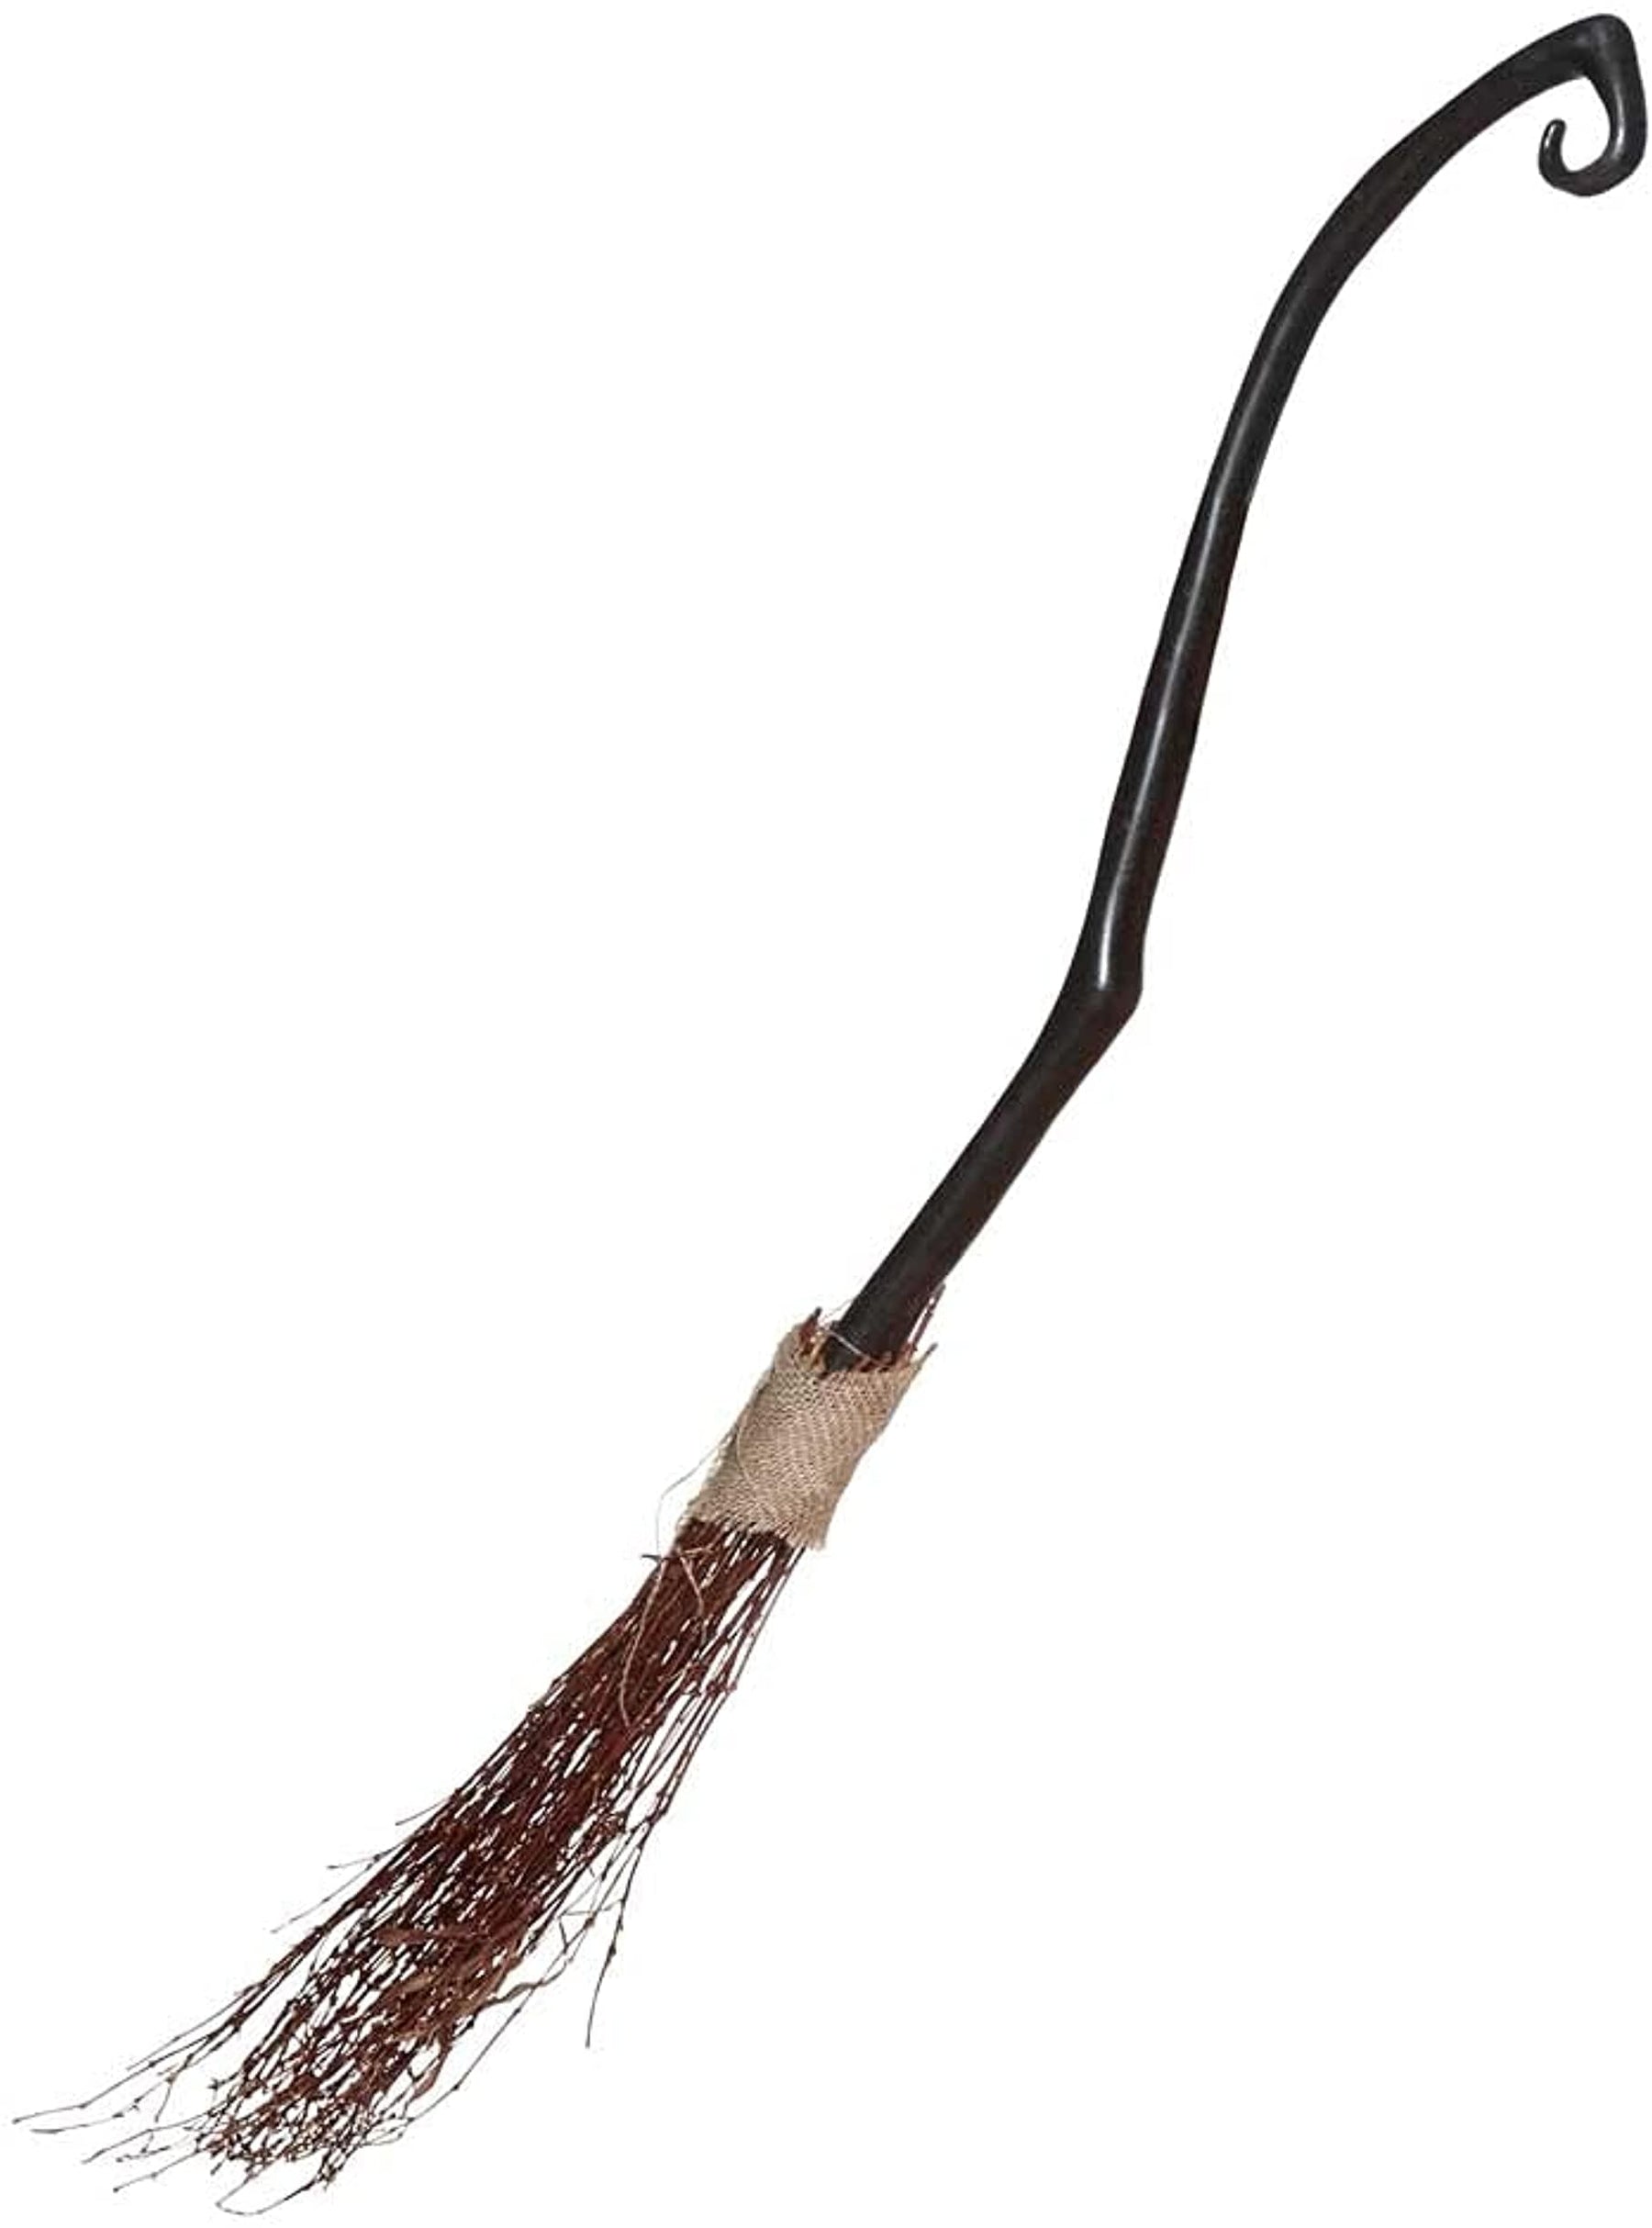 Wizards Witch Broom Halloween Costume Accessory